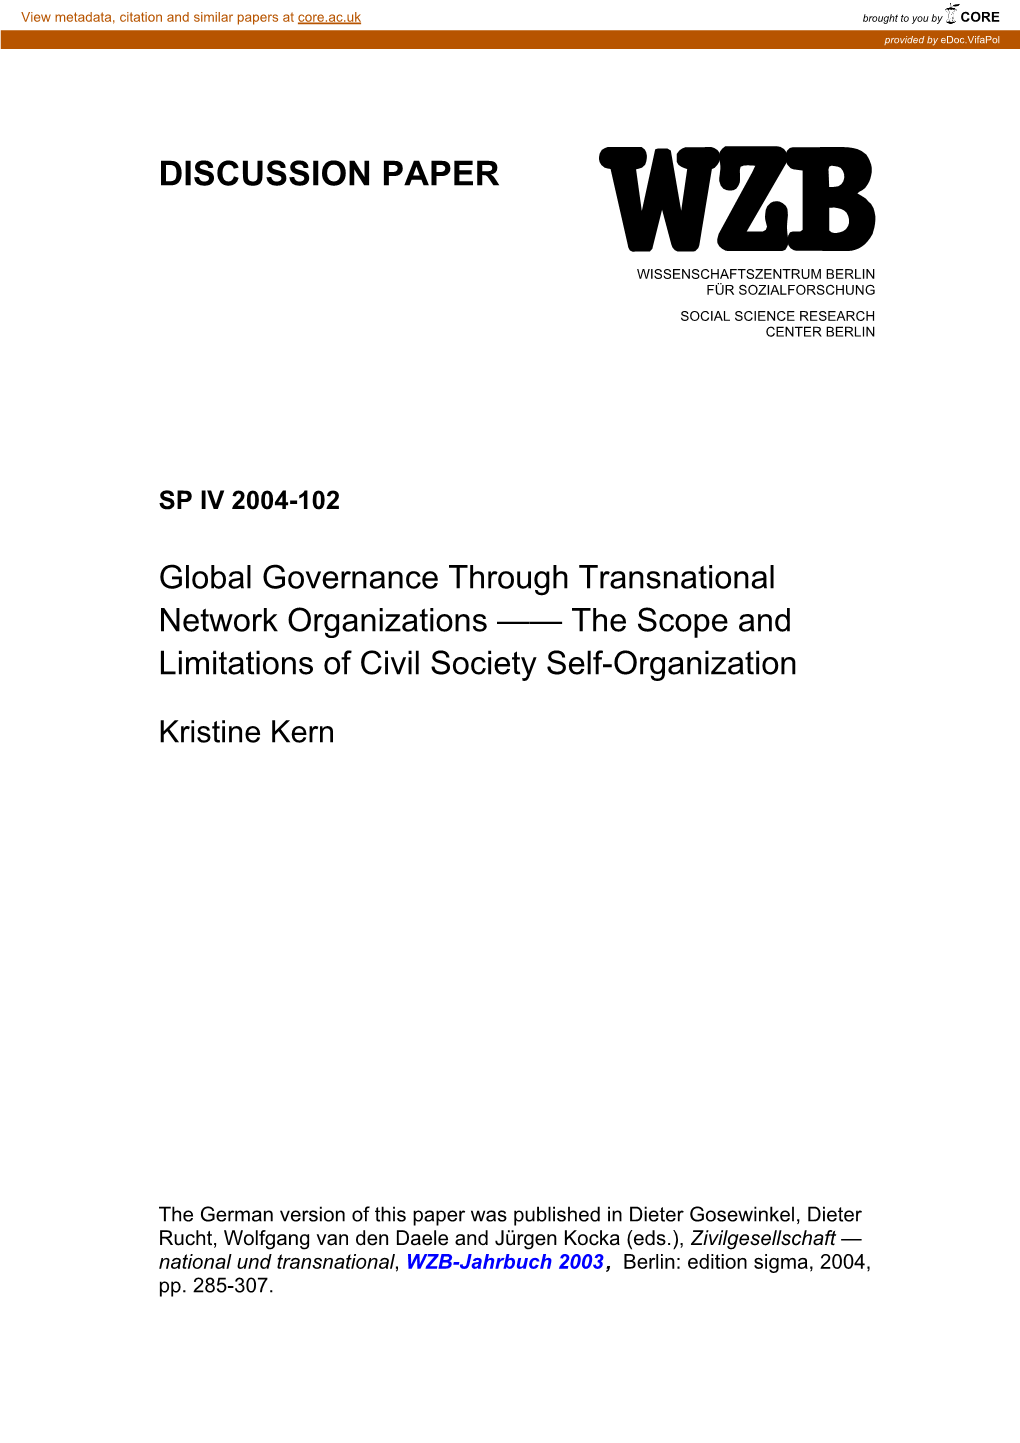 Global Governance Through Transnational Network Organizations —— the Scope and Limitations of Civil Society Self-Organization